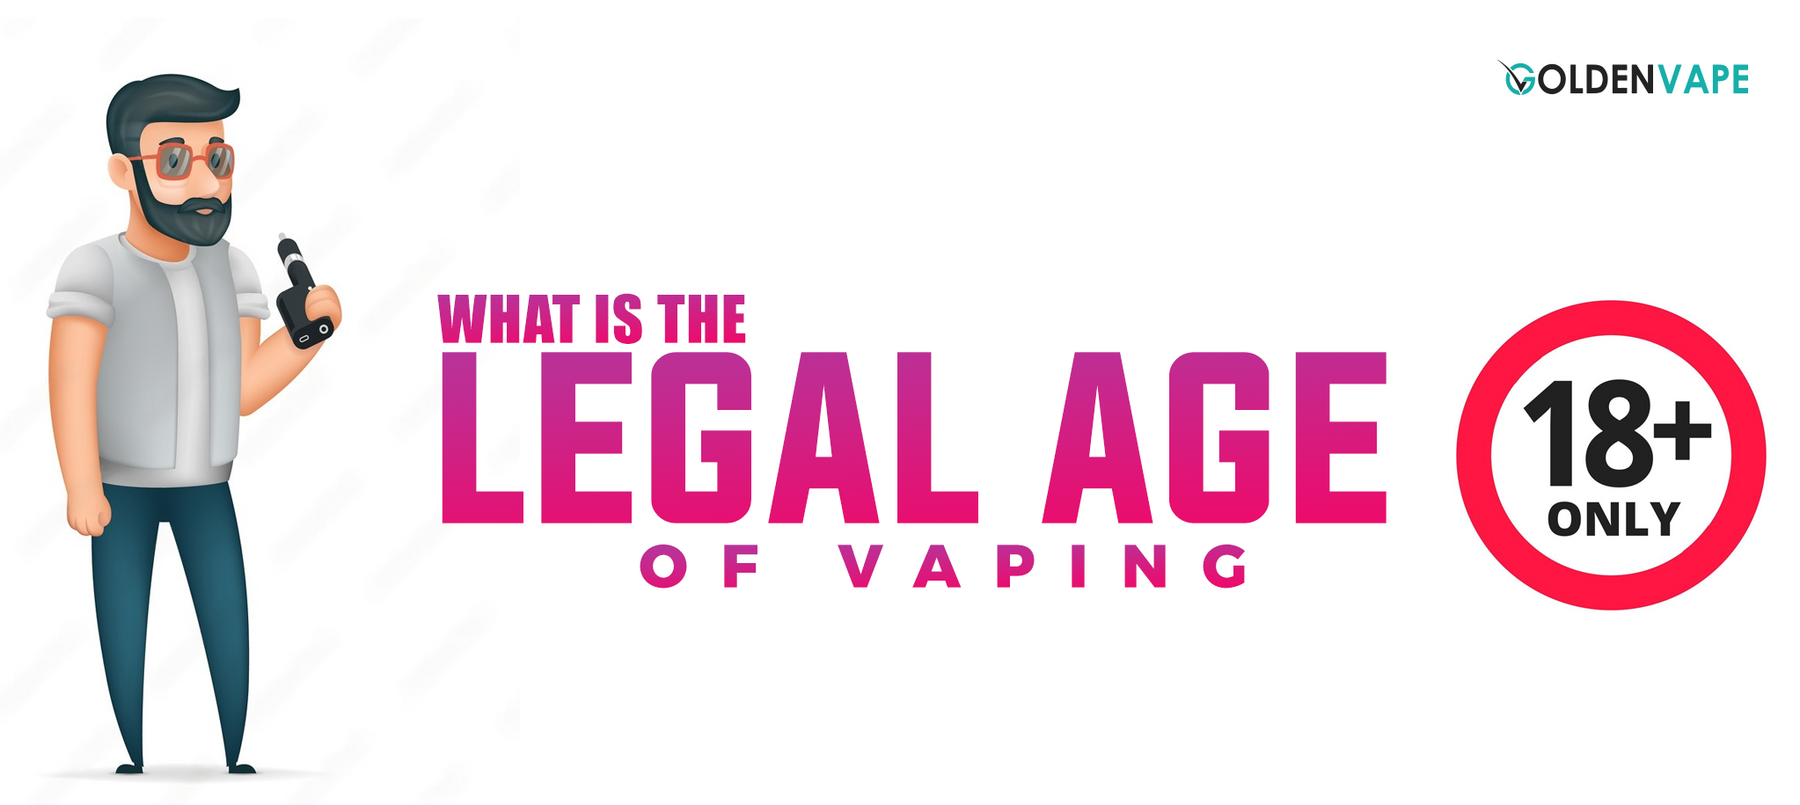 Legal Age for Vaping in the UK